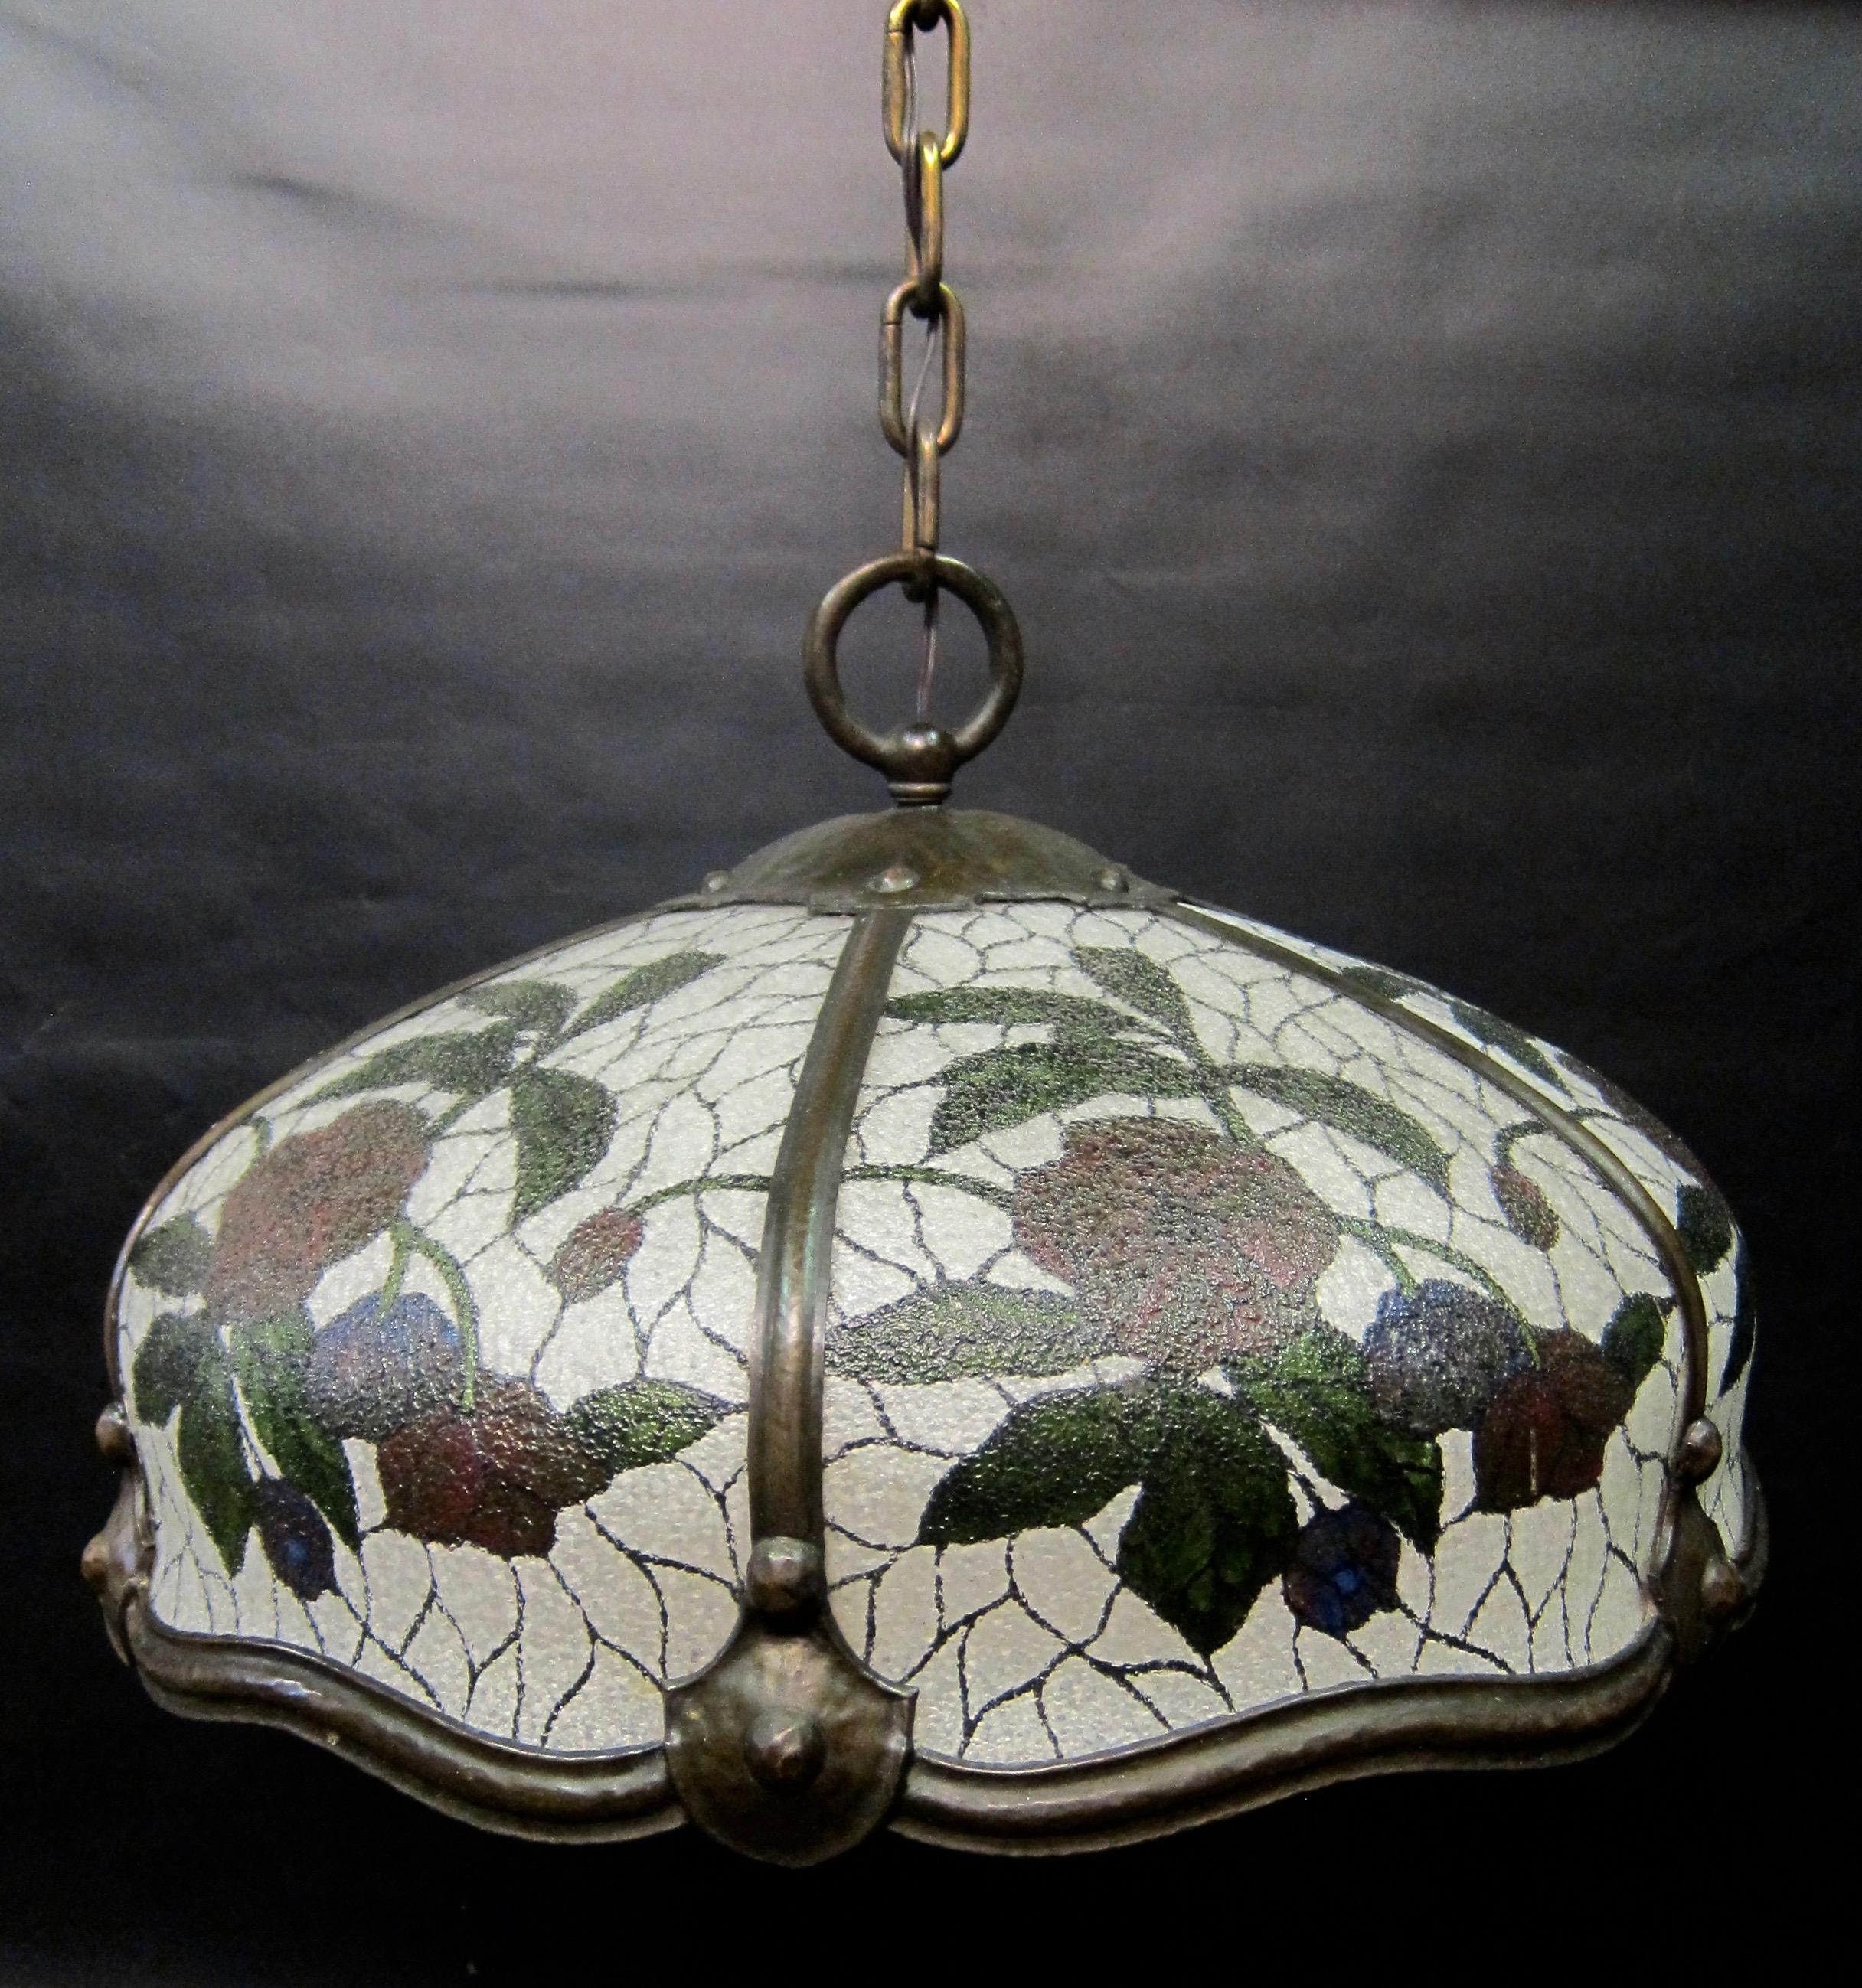 A vintage early 1900s Arts & Crafts ceiling fixture designed with reverse painted glass panels within a patinated hand-hammered bronze framework. Each hand painted panel is detailed with flowers on a textured curved glass that compliments the